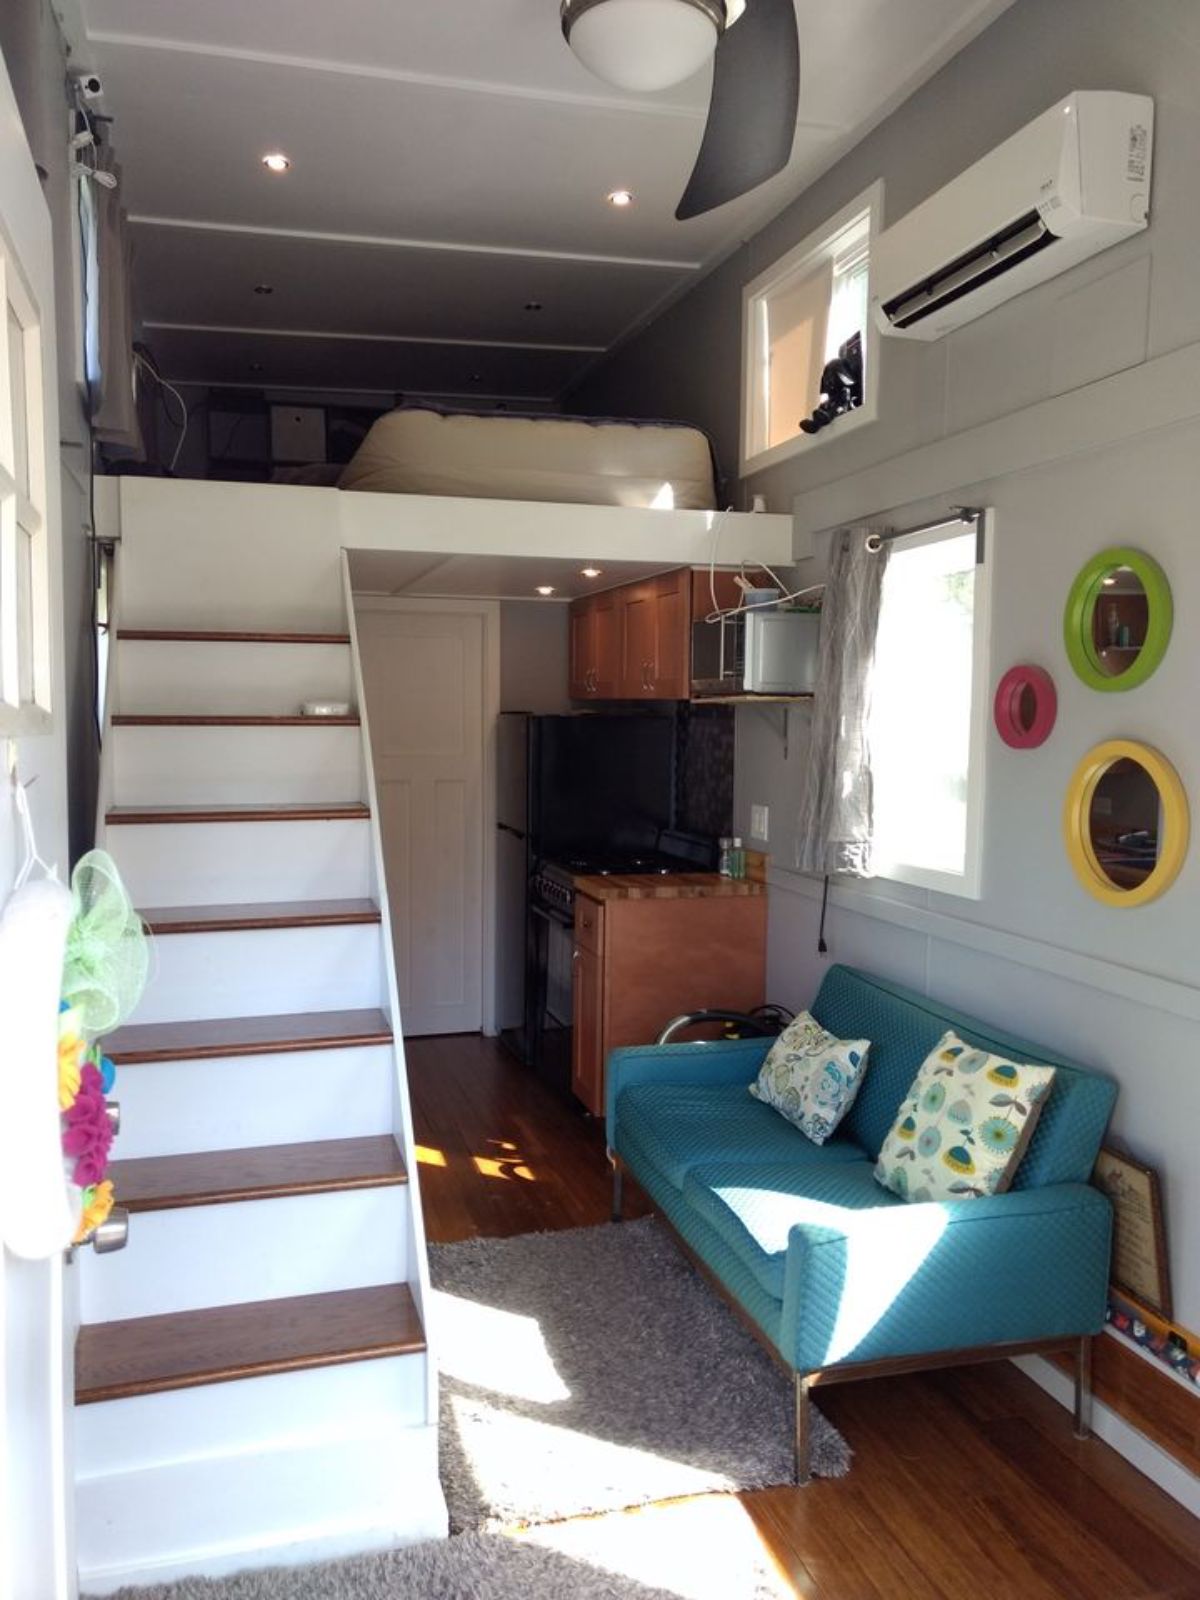 Overall view of 196 sf Tiny House on Wheels from inside